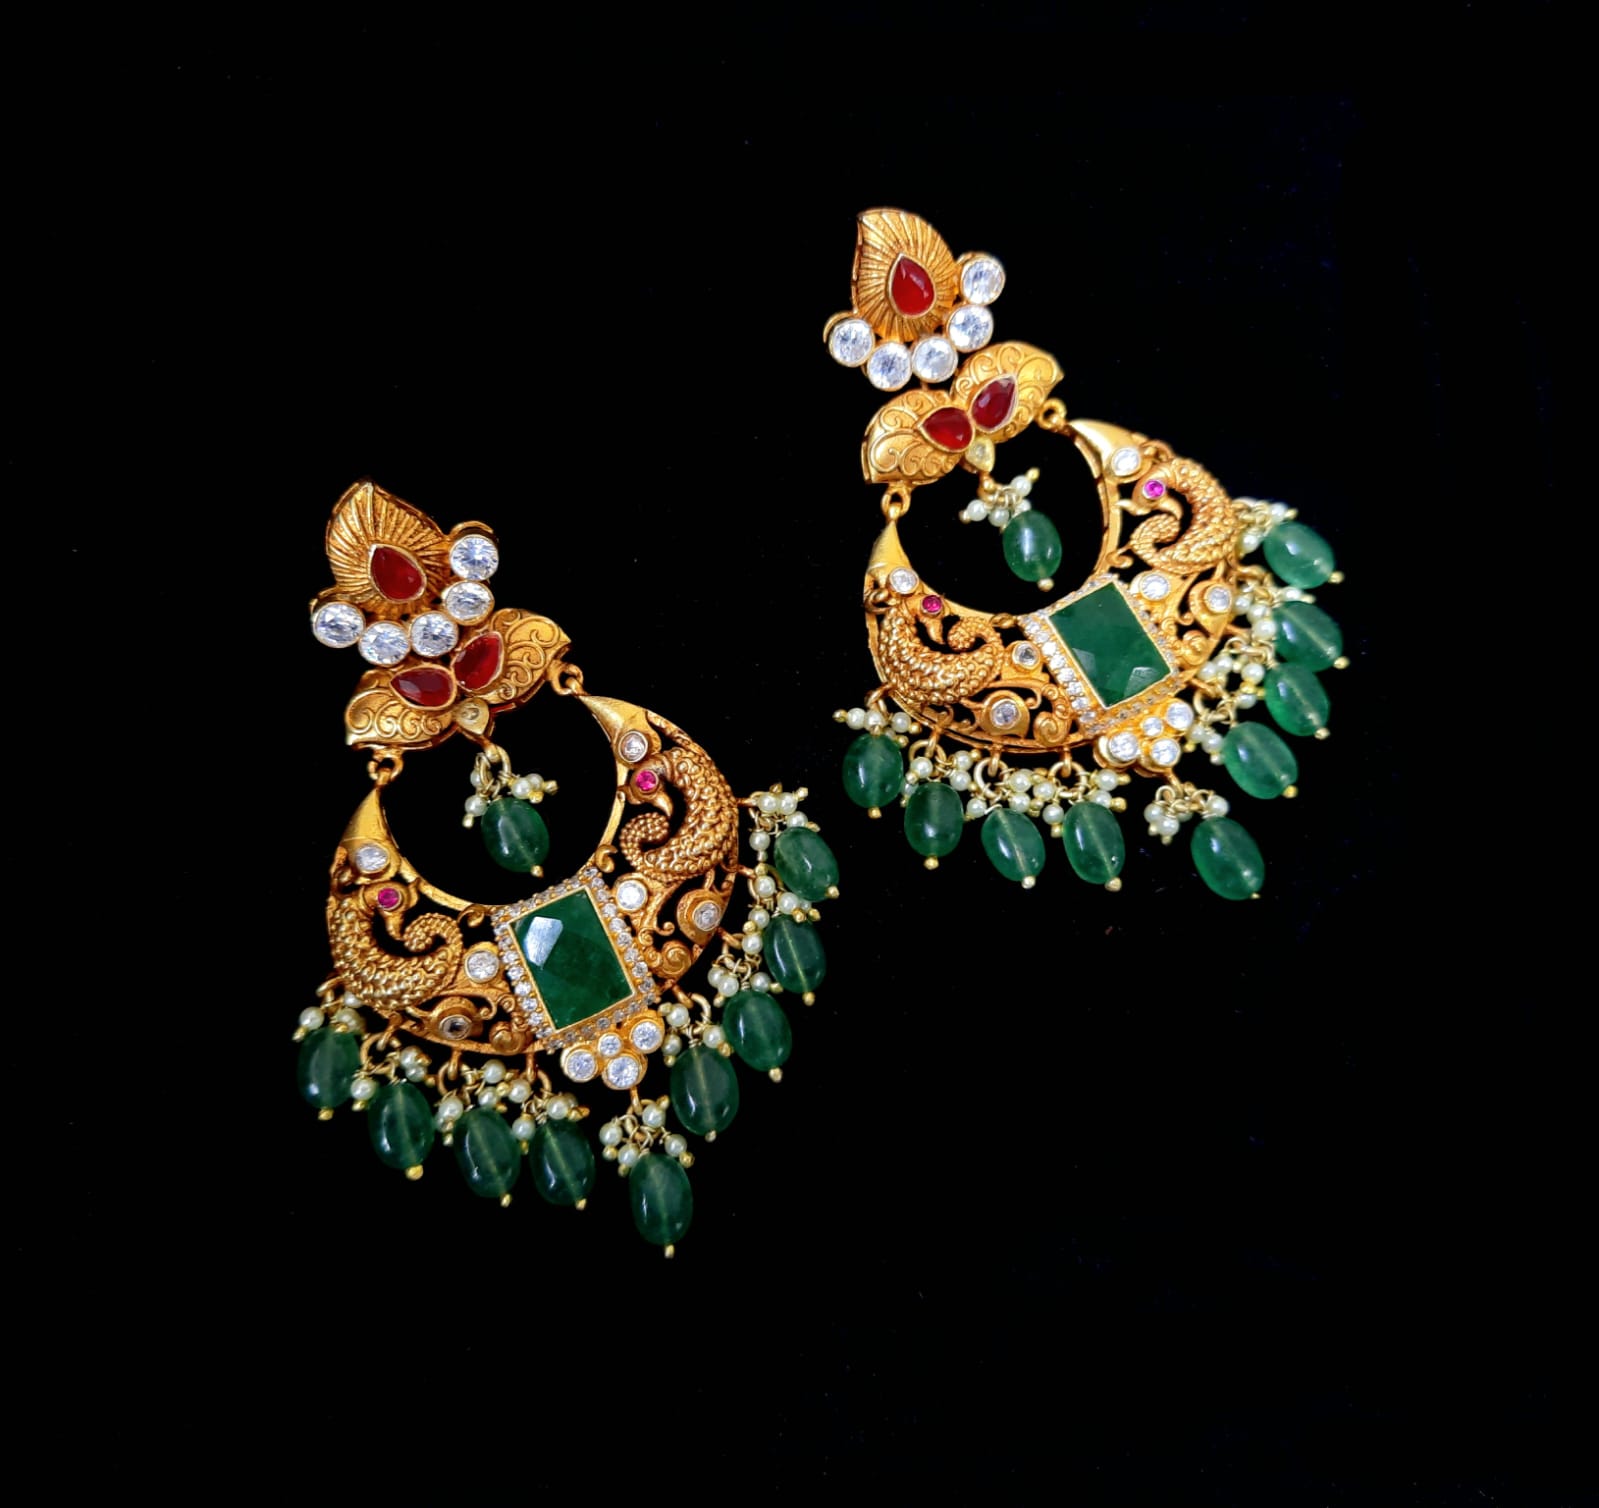 Antique Emerald and Kundan Studded Gold Earrings with Fine Hangings